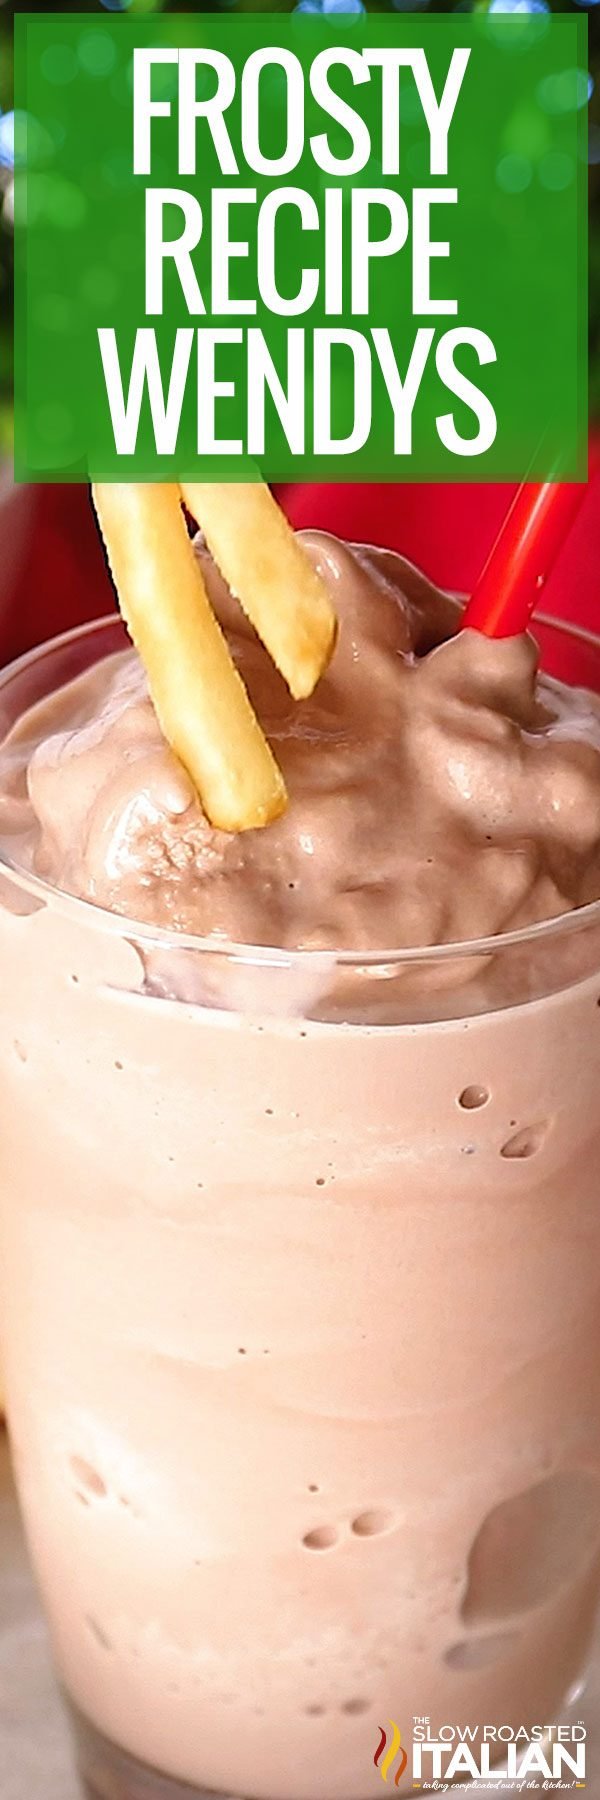 titled image for frosty recipe wendys